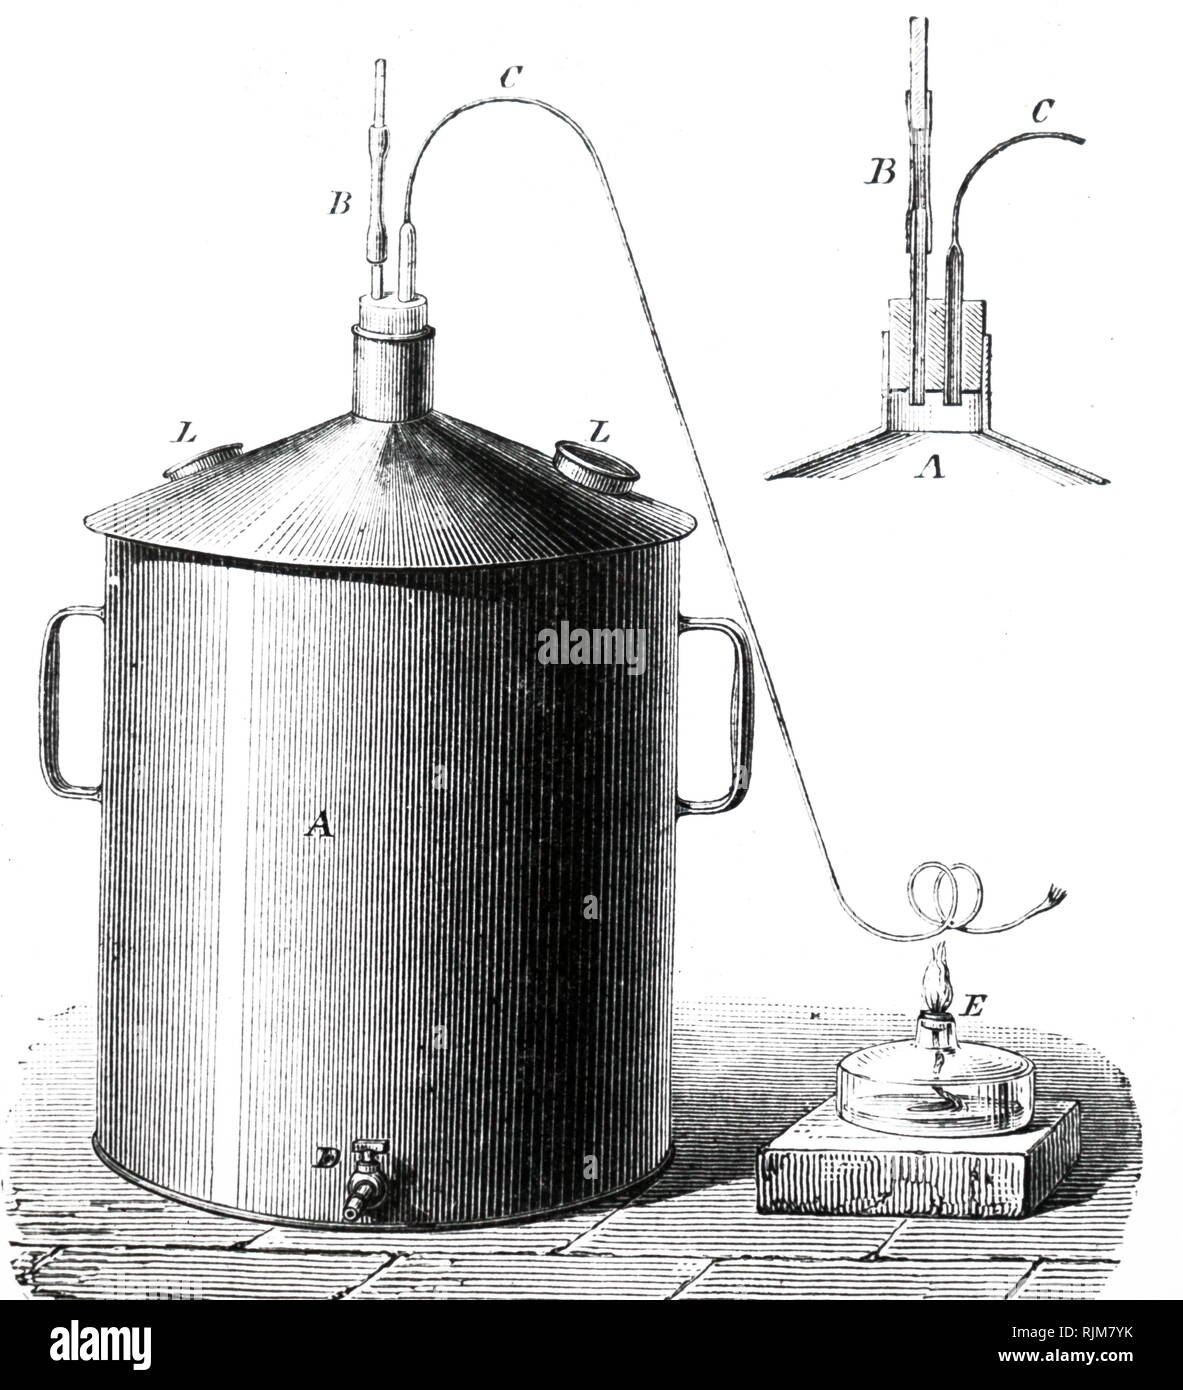 An engraving depicting a can and stopper used for preparing yeast for brewing by Pasteur's method. Dated 19th century Stock Photo